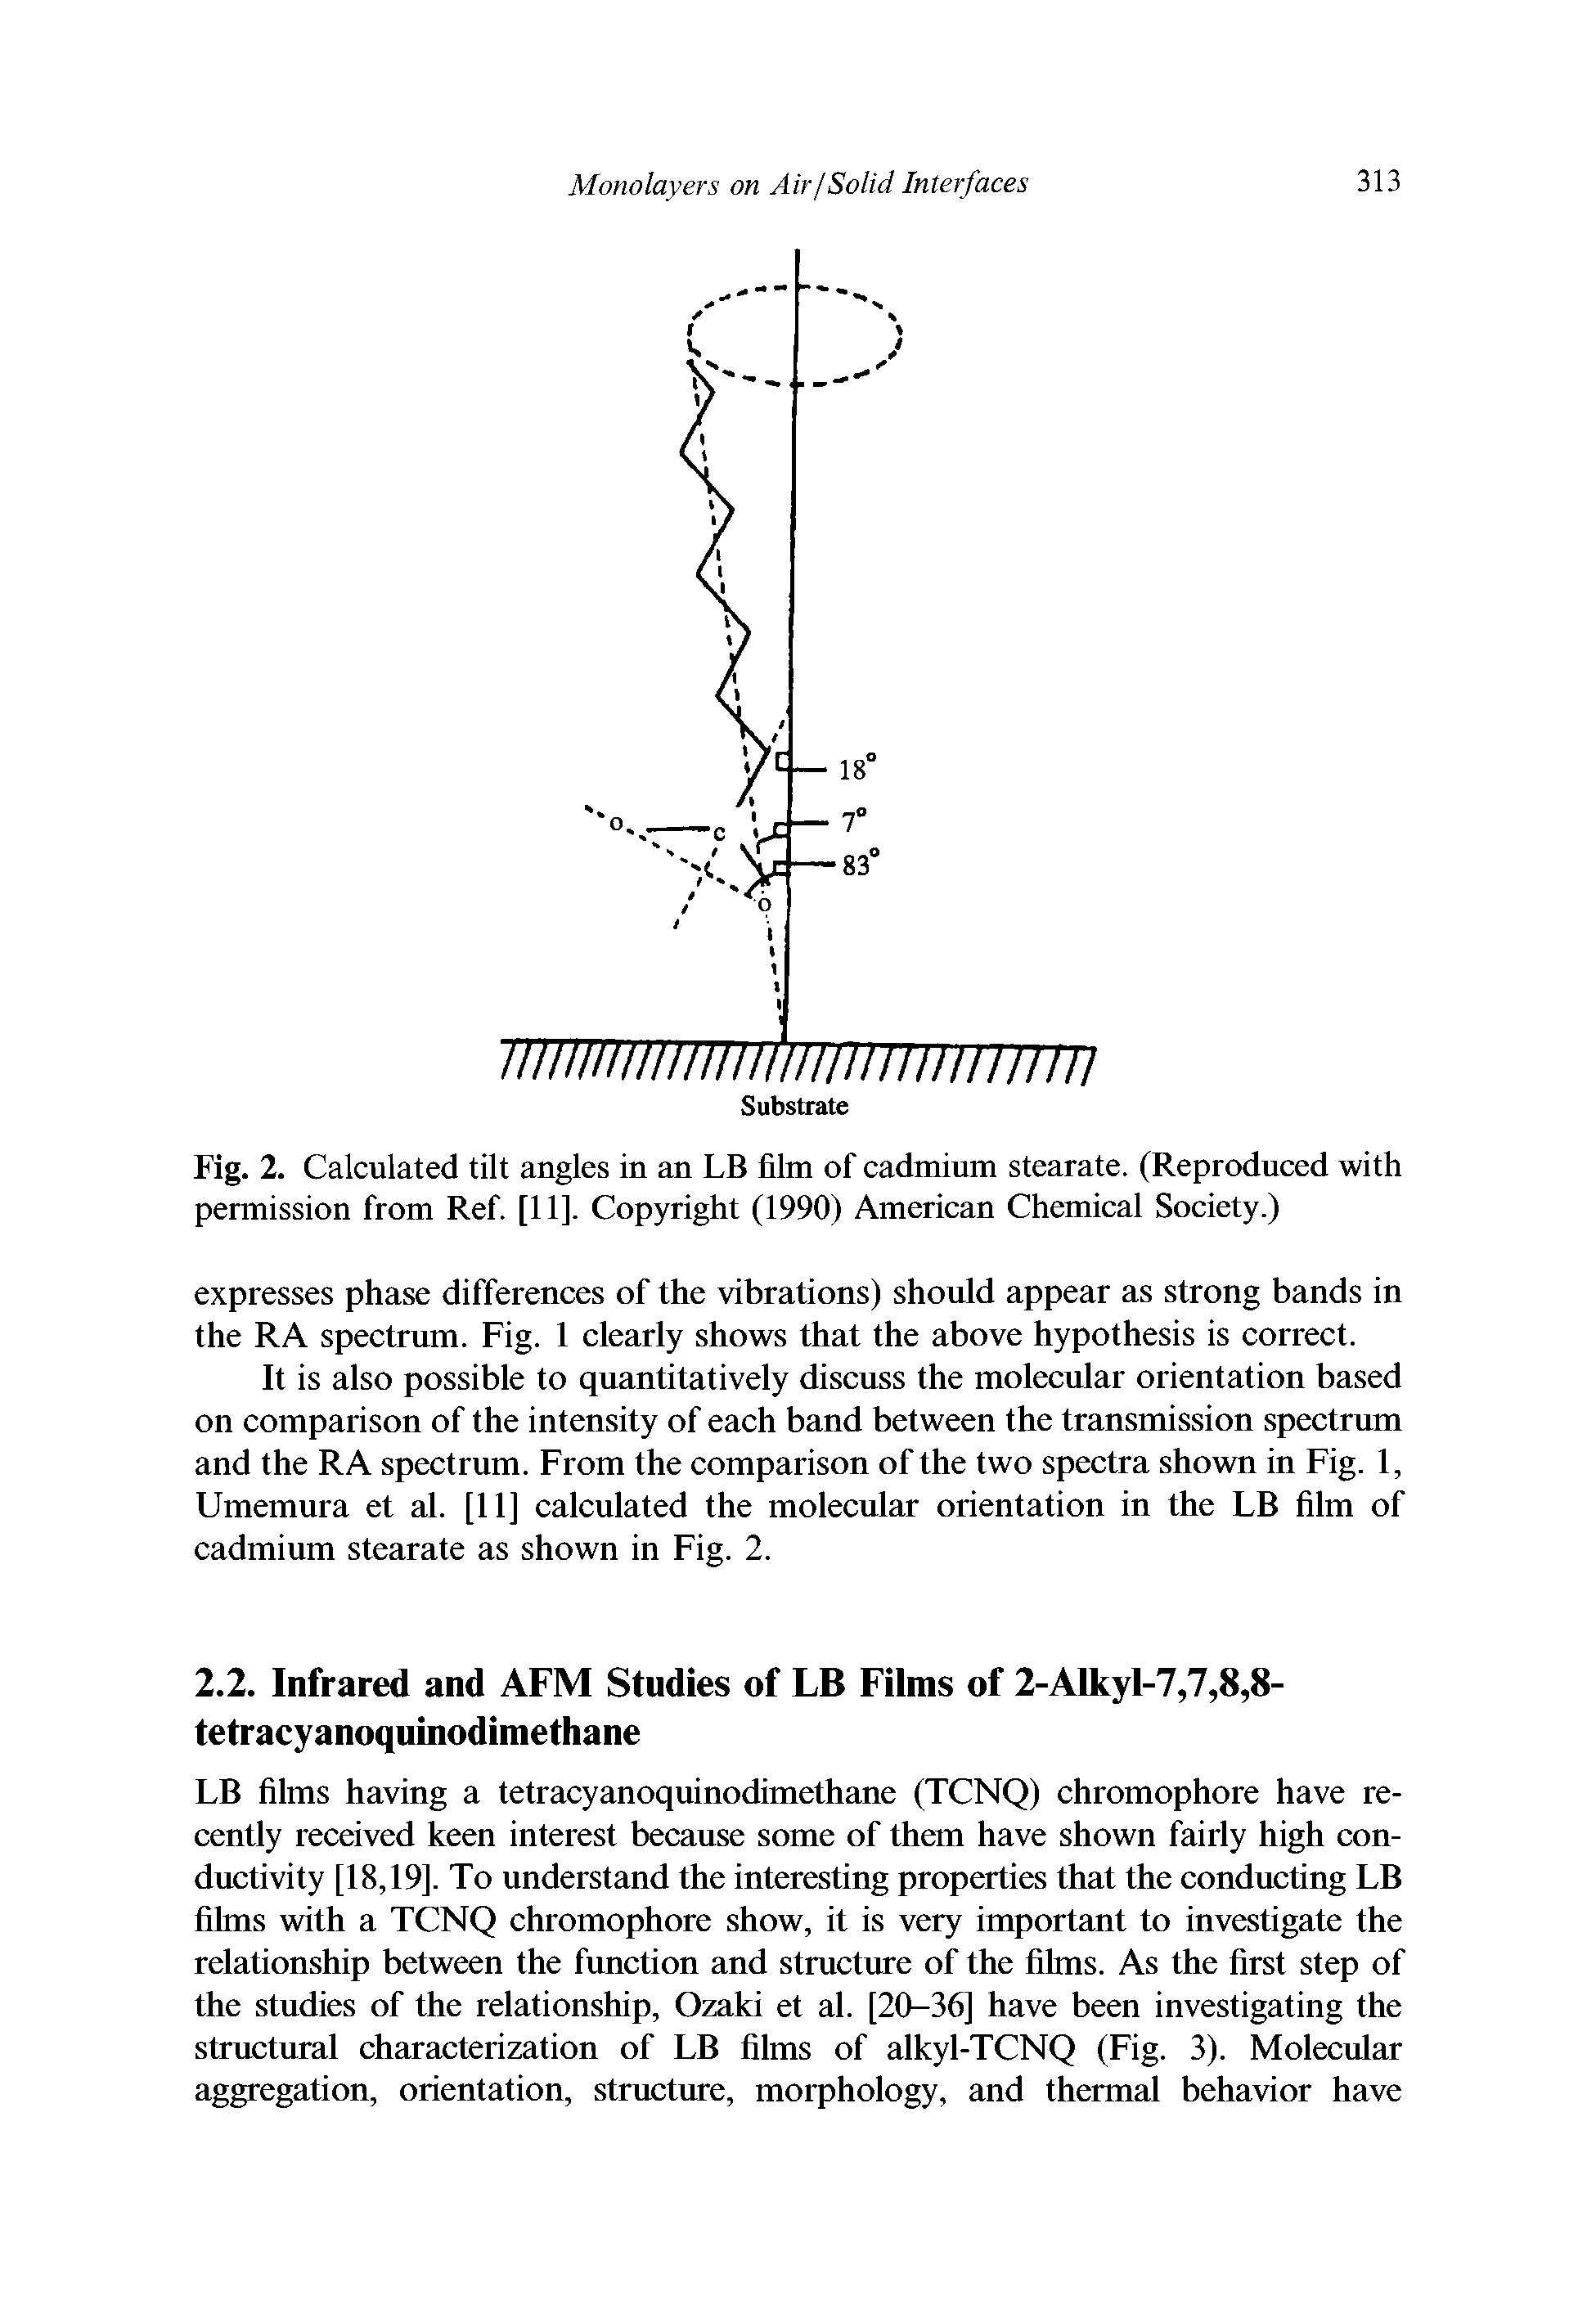 Fig. 2. Calculated tilt angles in an LB film of cadmium stearate. (Reproduced with permission from Ref. [11]. Copyright (1990) American Chemical Society.)...